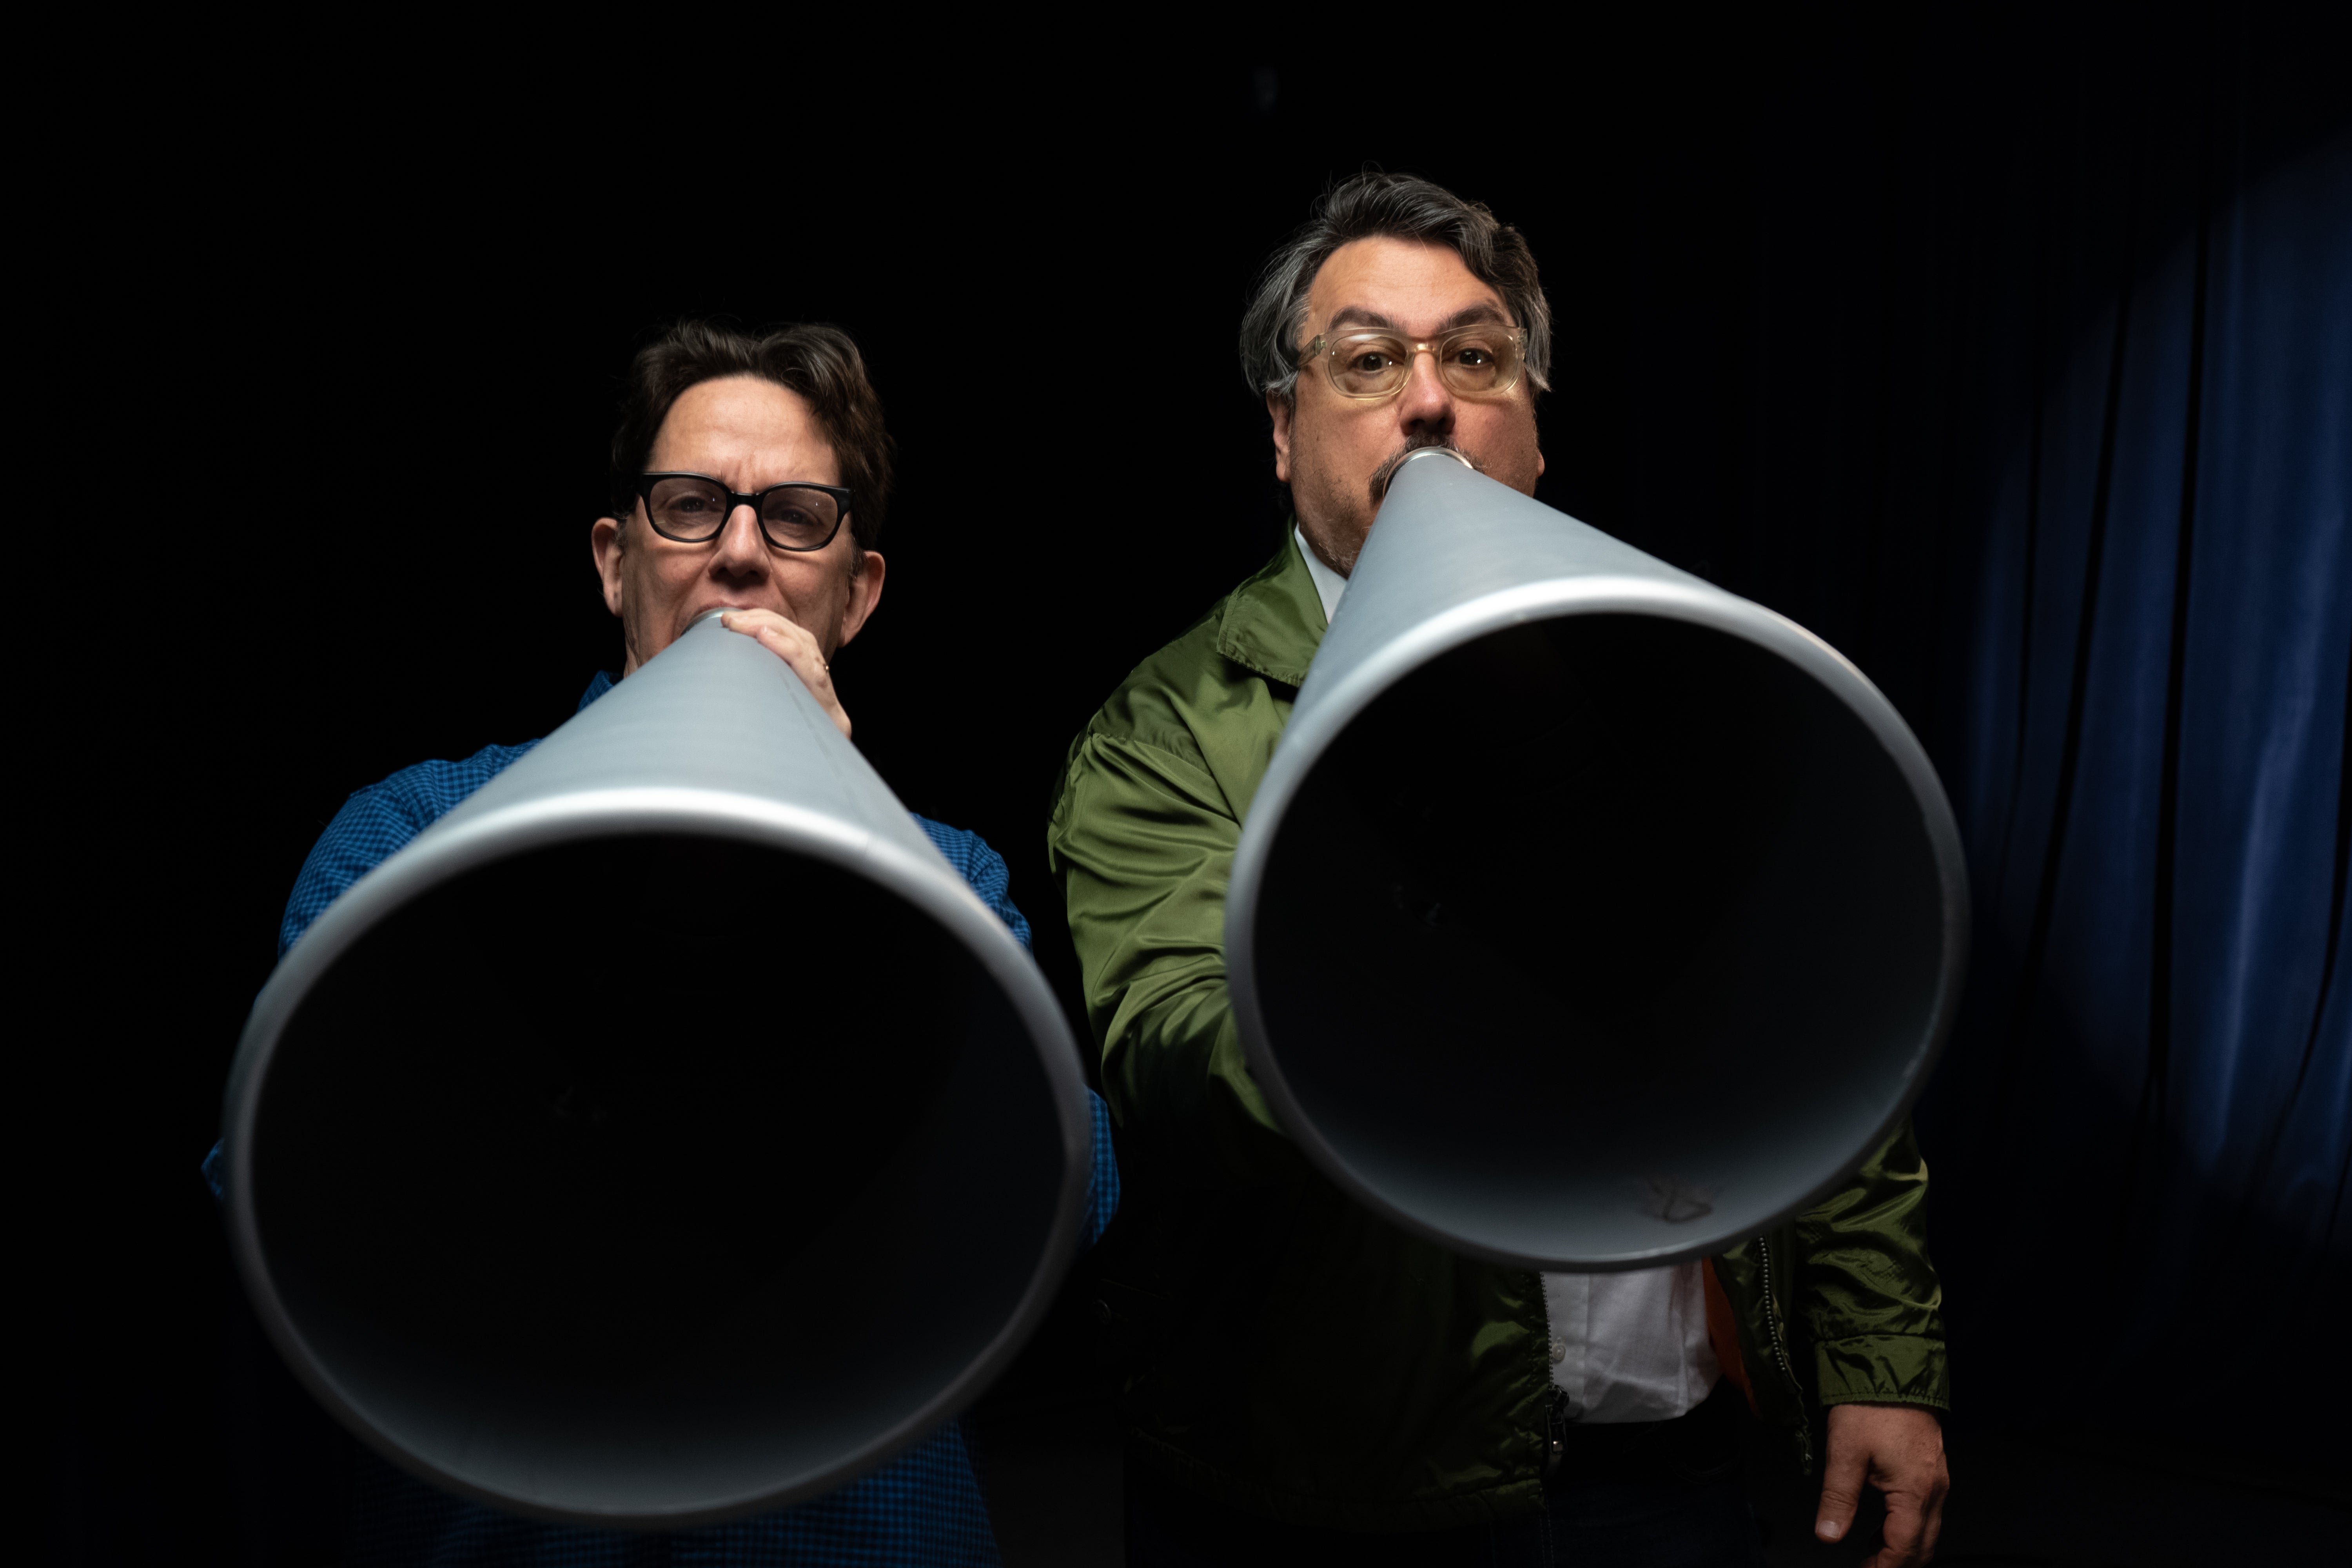 Image used with permission from Ticketmaster | An Evening with They Might Be Giants: Flood, BOOK and Beyond tickets